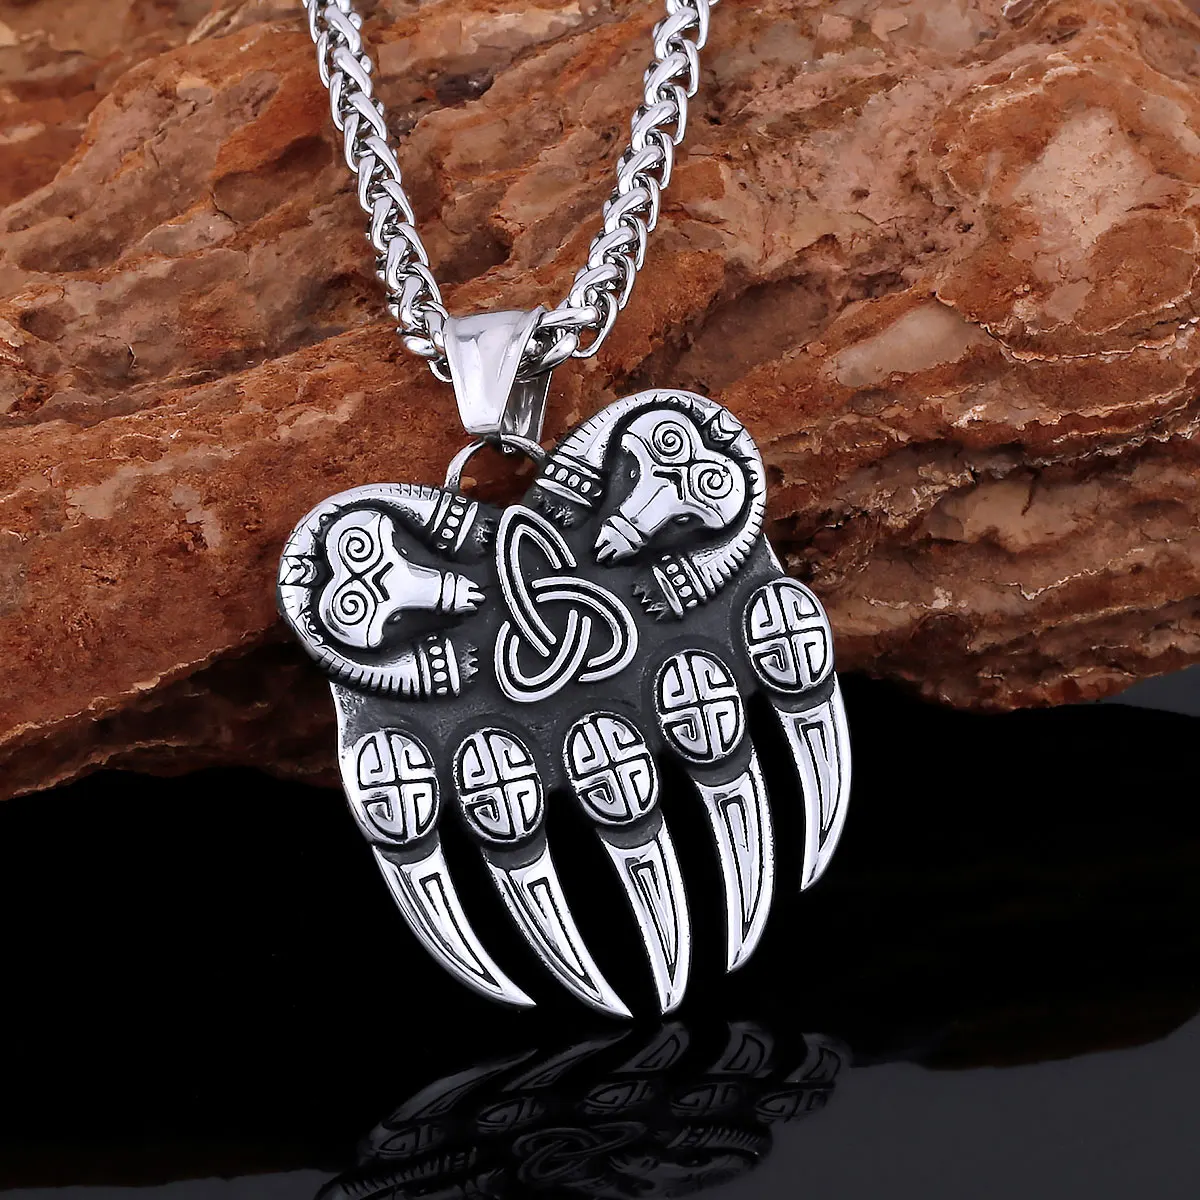 

Nordic Viking Stainless Steel Bear Claw Necklace Retro Men's Celtic Knot Amulet Animal Pattern Pendant Scandinavian Jewelry Gift